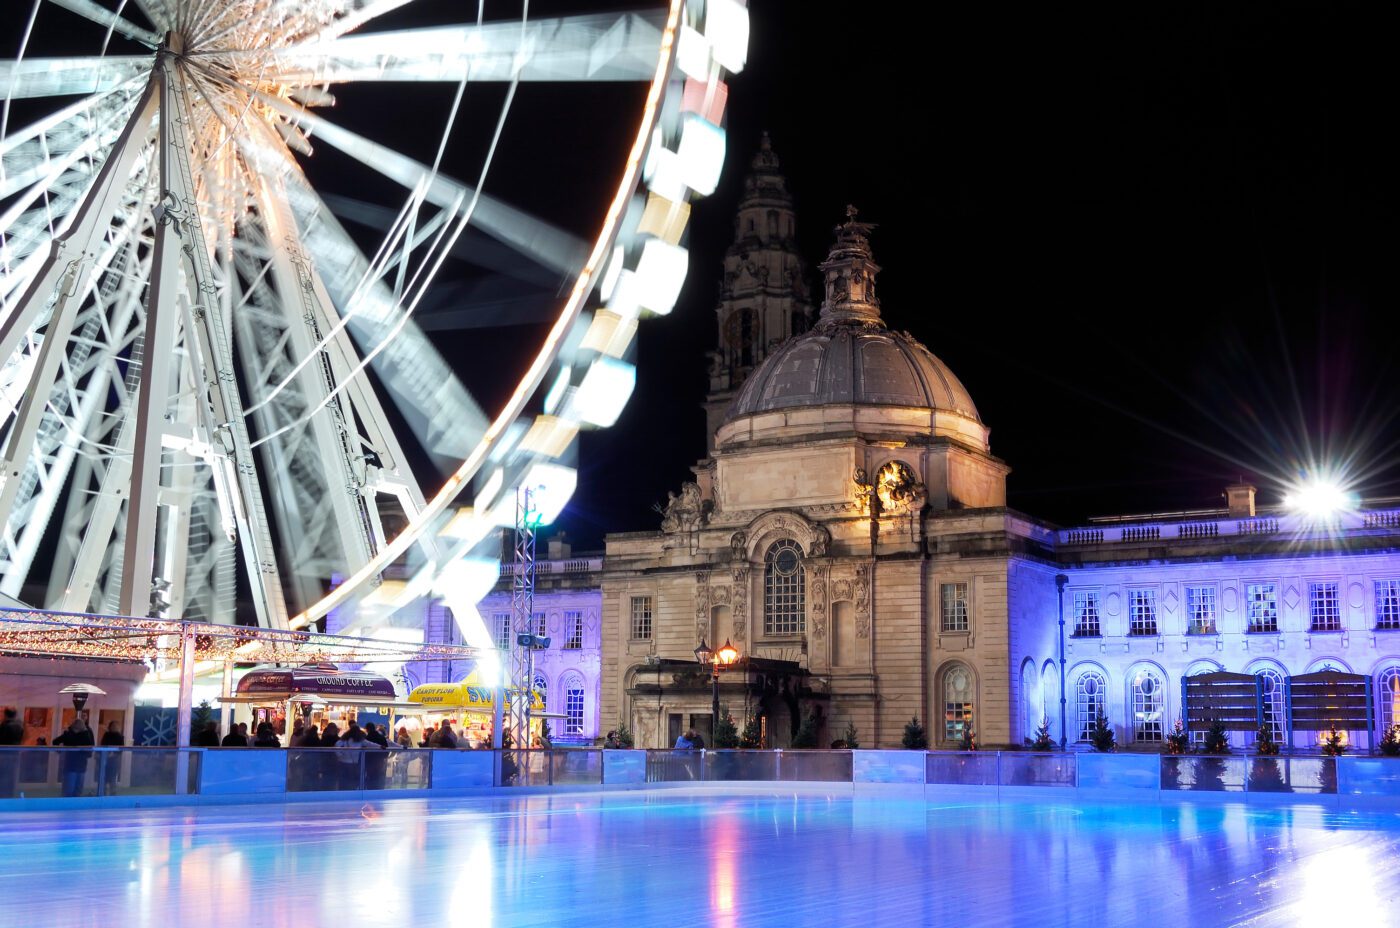 An empty Ice rink and winter wonderland Cardiff. City Hall in background.